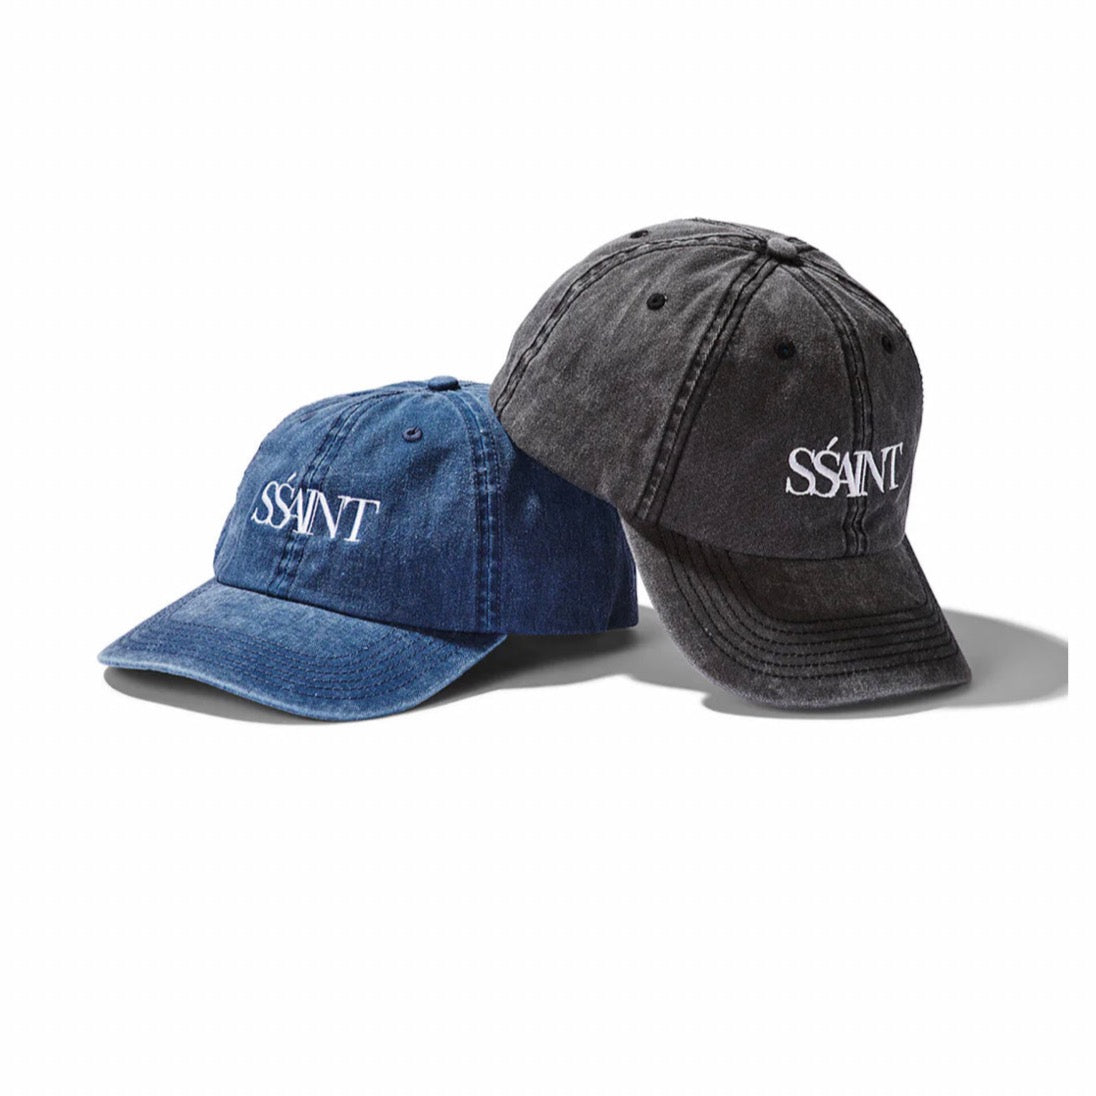 Limited Edition SSAINT Cap by Ssaint